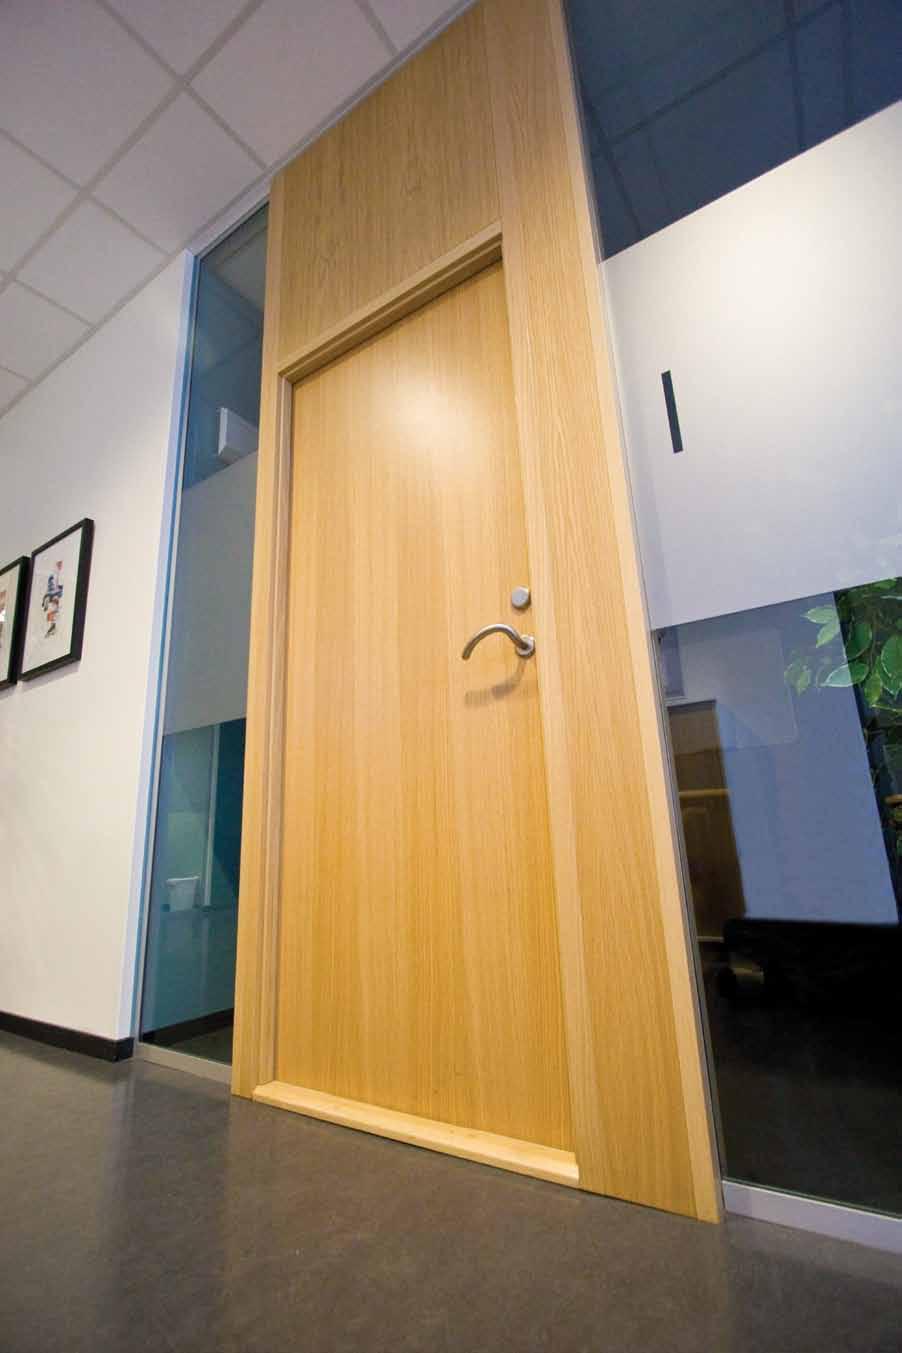 2 3 Safety and security ASSA ABLOY offers the largest range of doorsets in the UK and our products enhance buildings across the country.